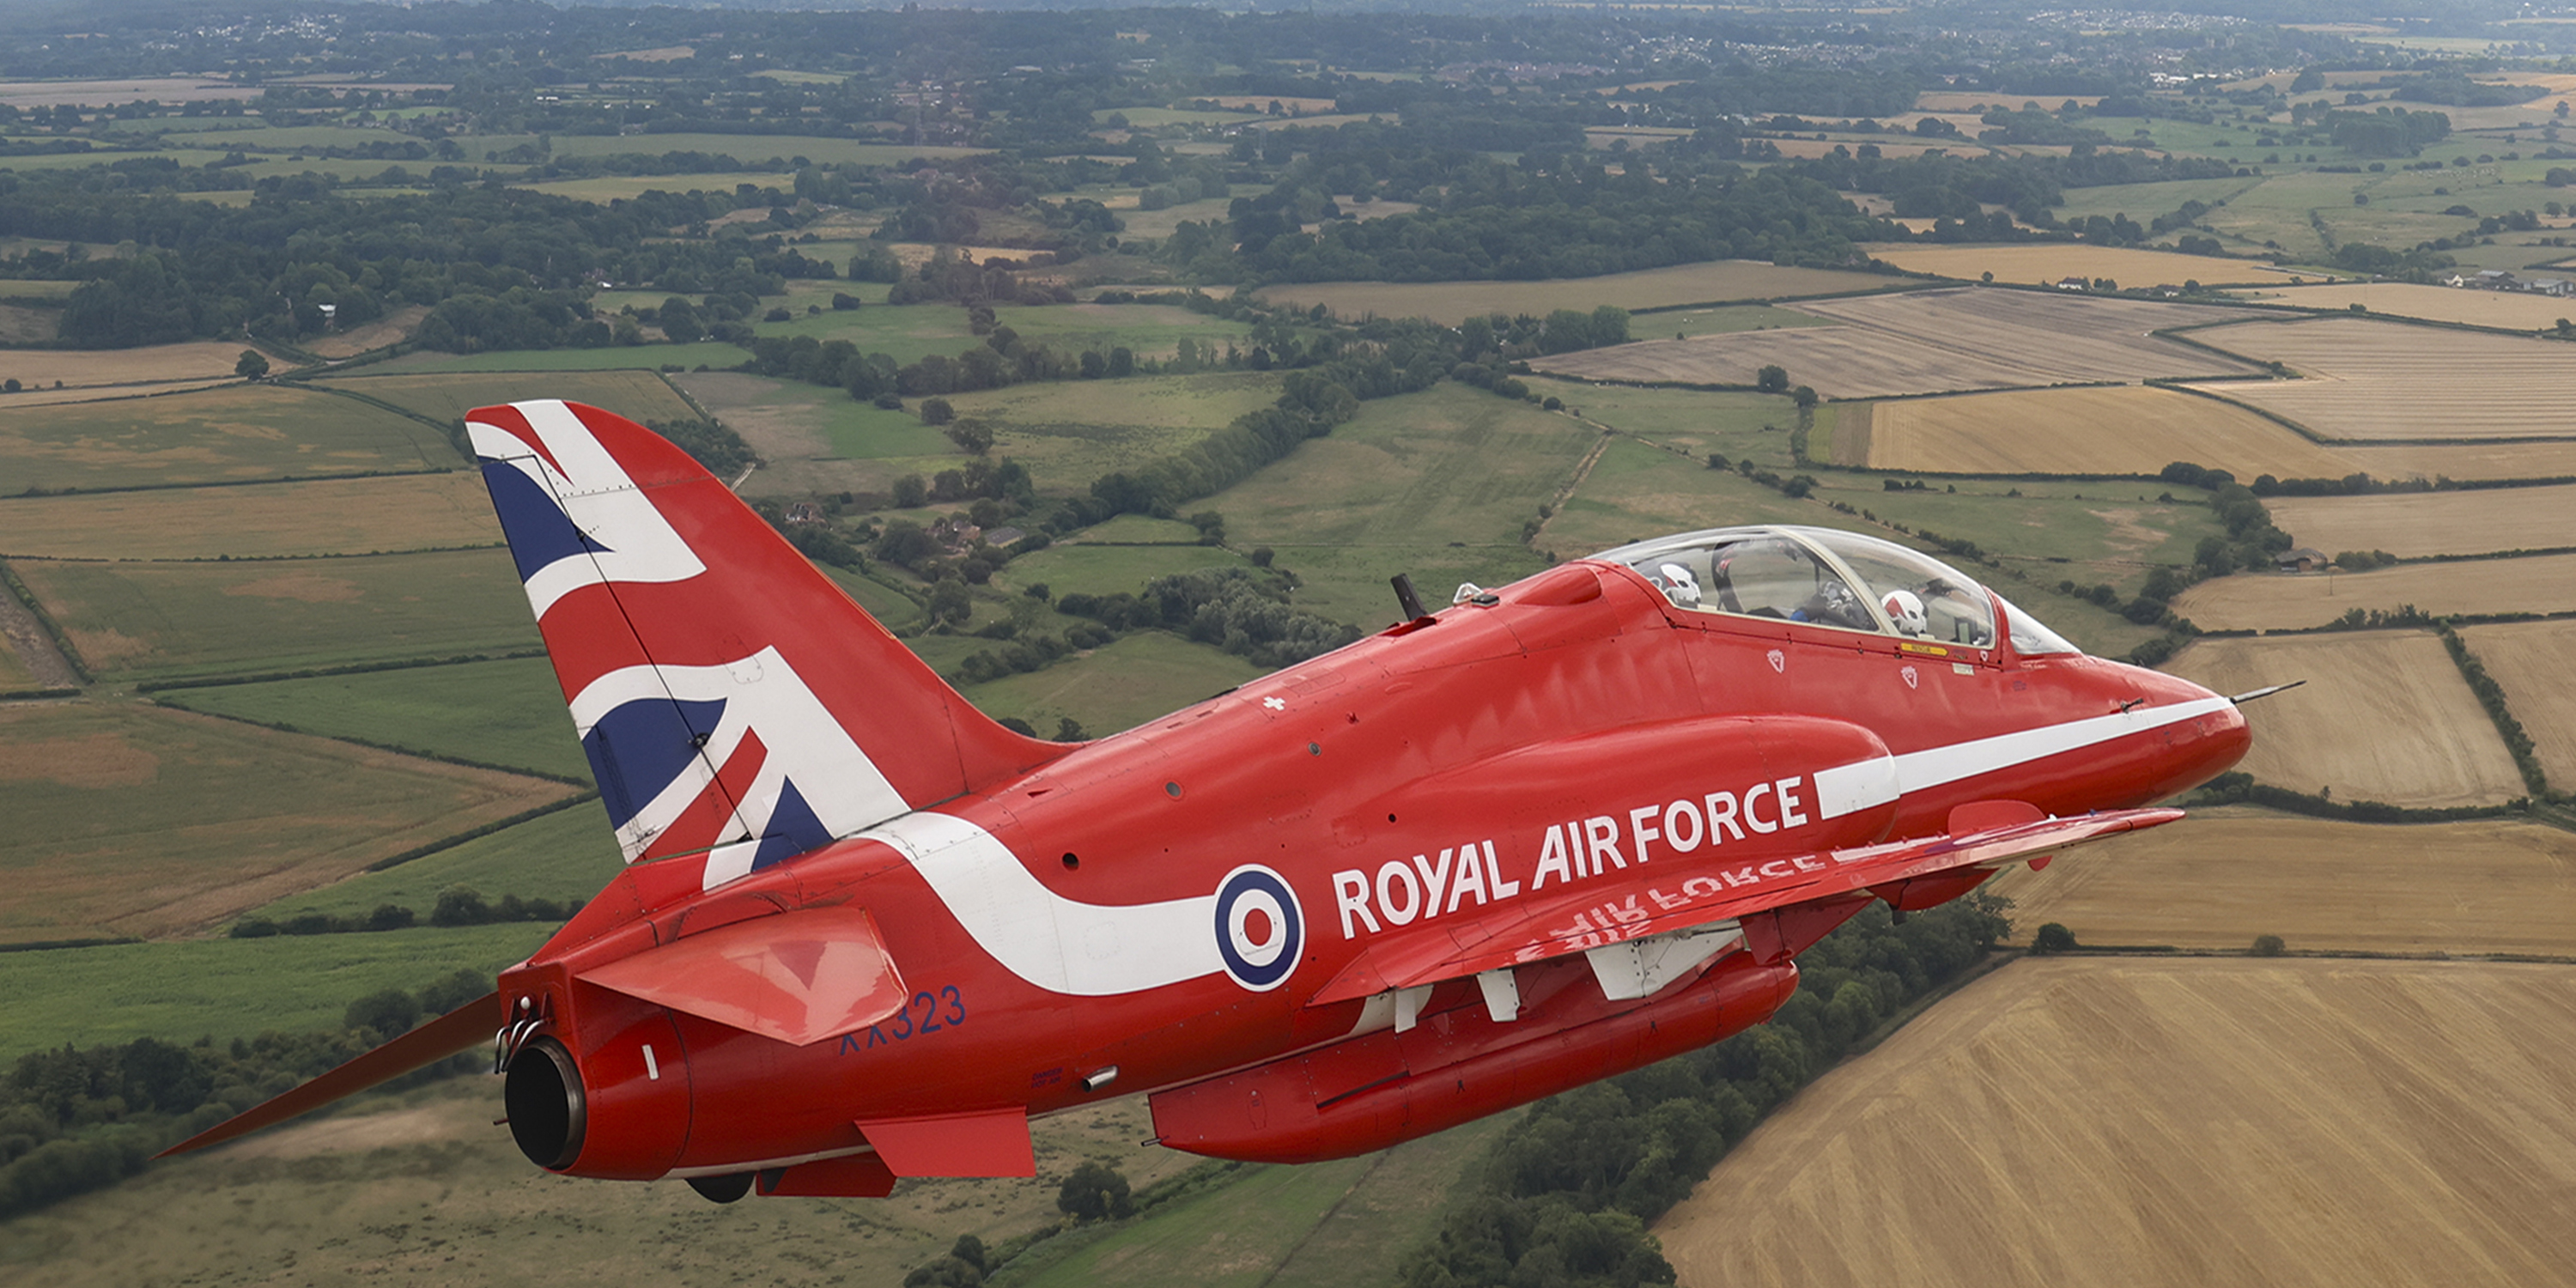 XX323 - the Hawk jet which was the final Red Arrows aircraft to take off from RAF Scampton.